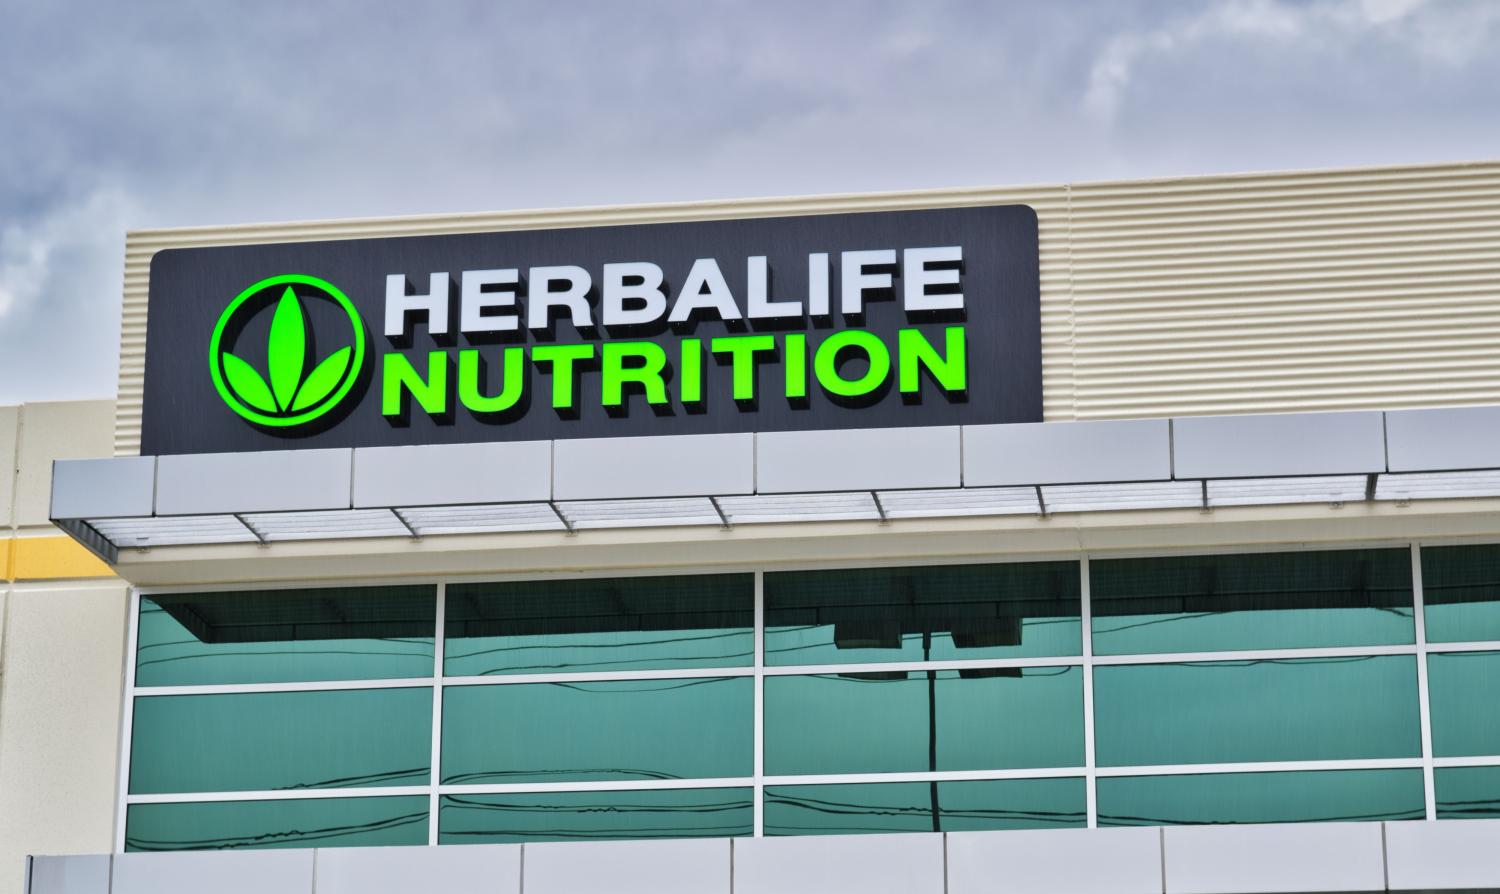 Herbalife sign on building